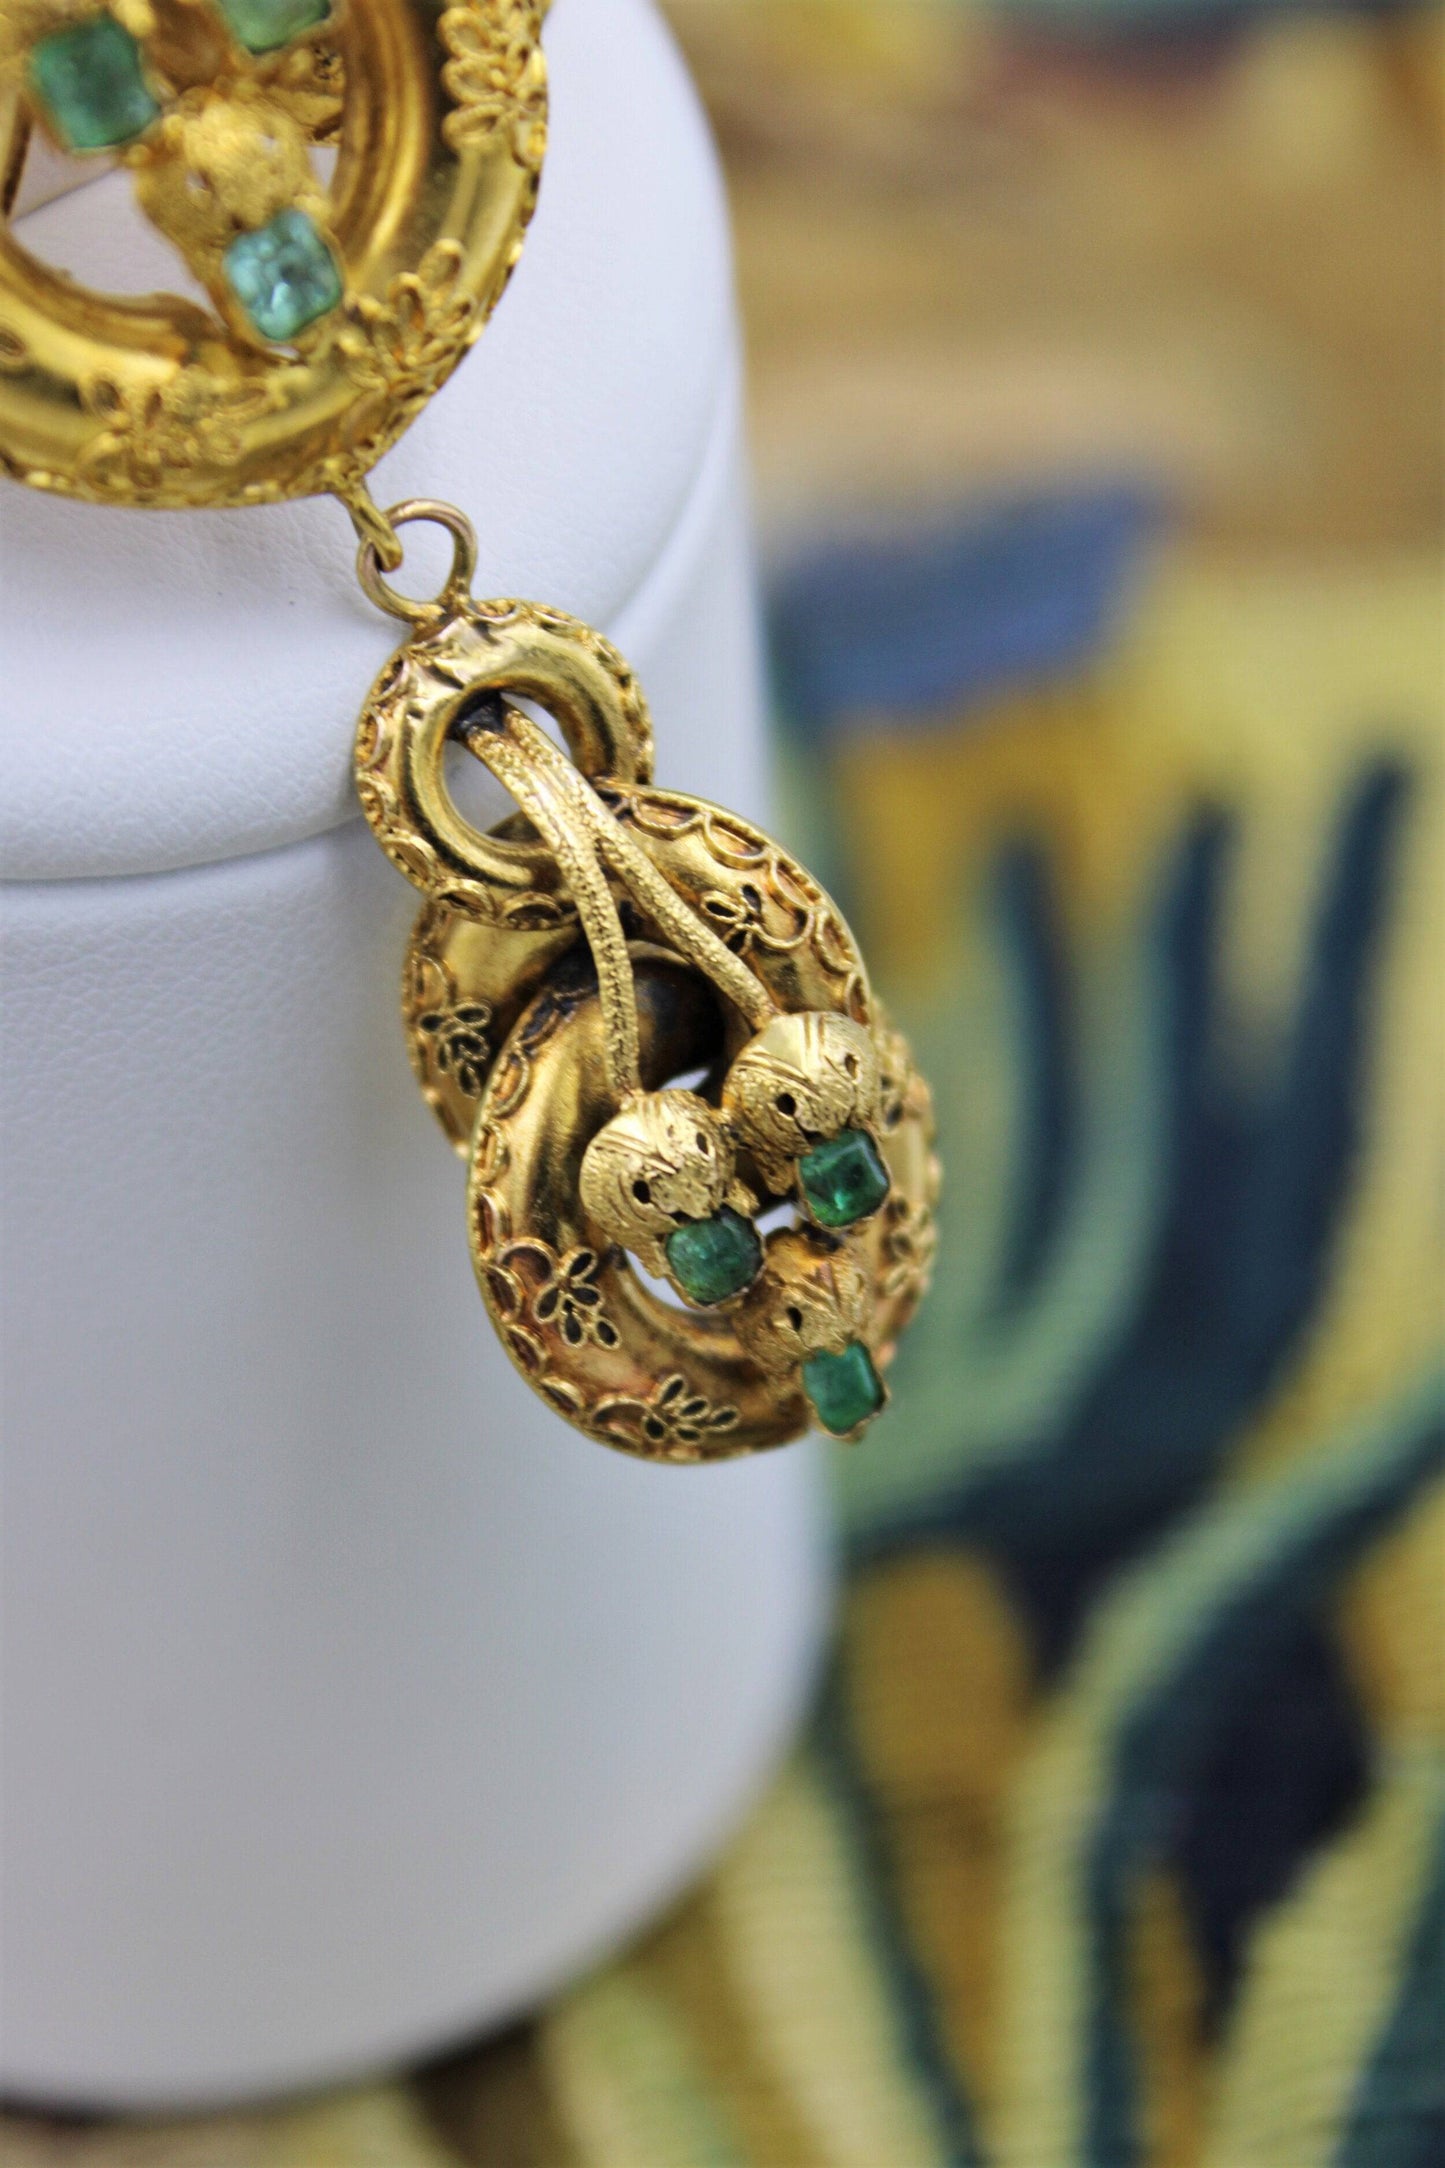 A very fine Emerald Etruscan Revival Pendant/Brooch mounted in High Carat Yellow Gold, English, Circa 1860 - Robin Haydock Antiques